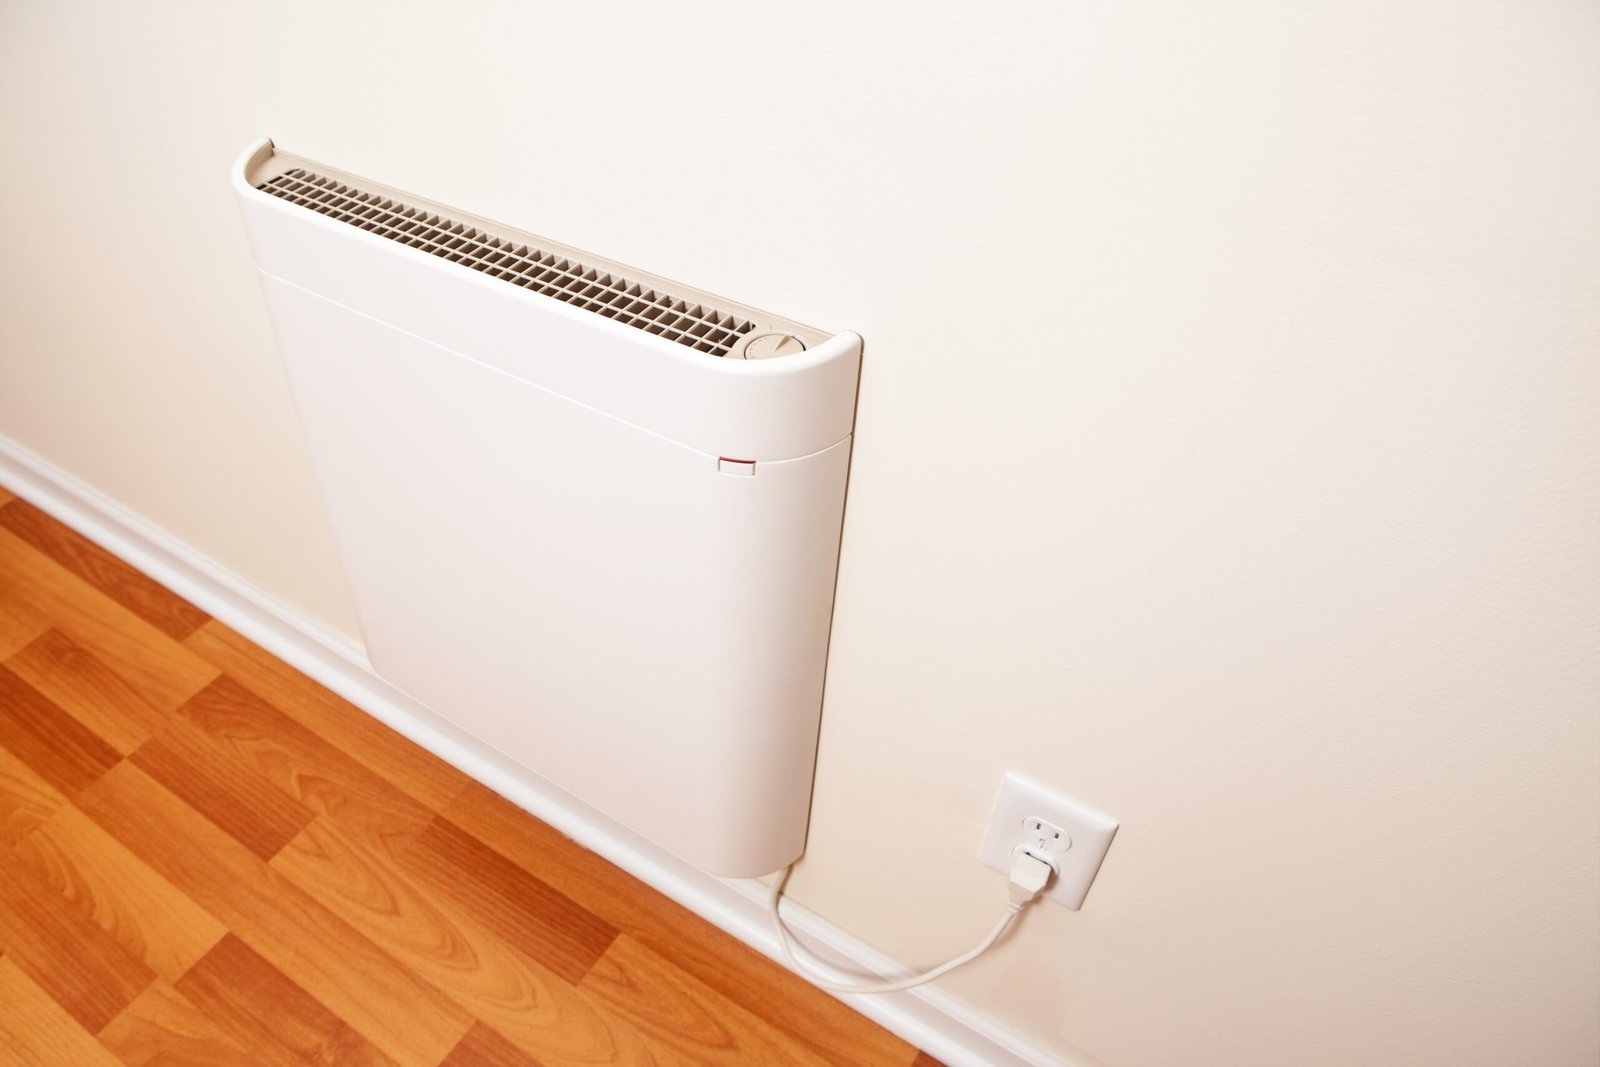 Electric Wall Heaters: Ultimate Guide for Home Use